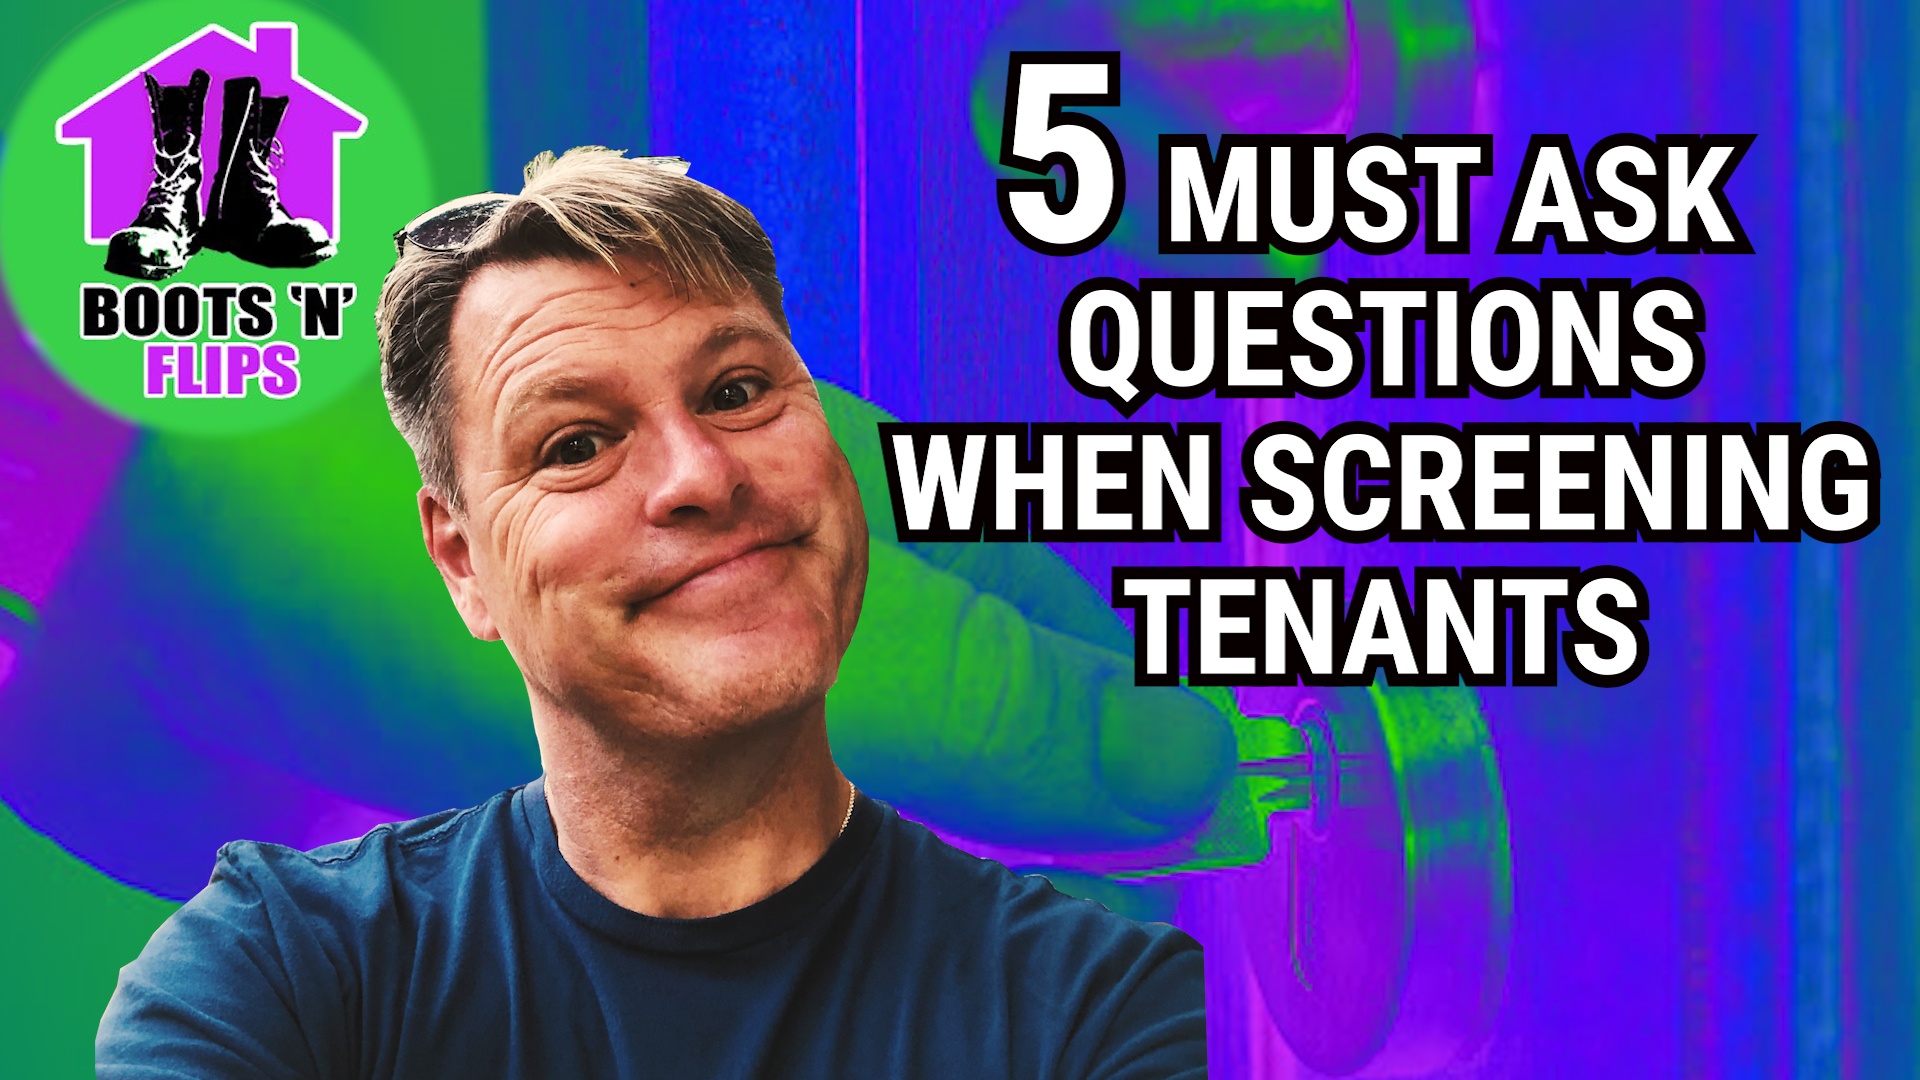 5 Must Ask Questions When Screening Tenants_ThumbnailRevised